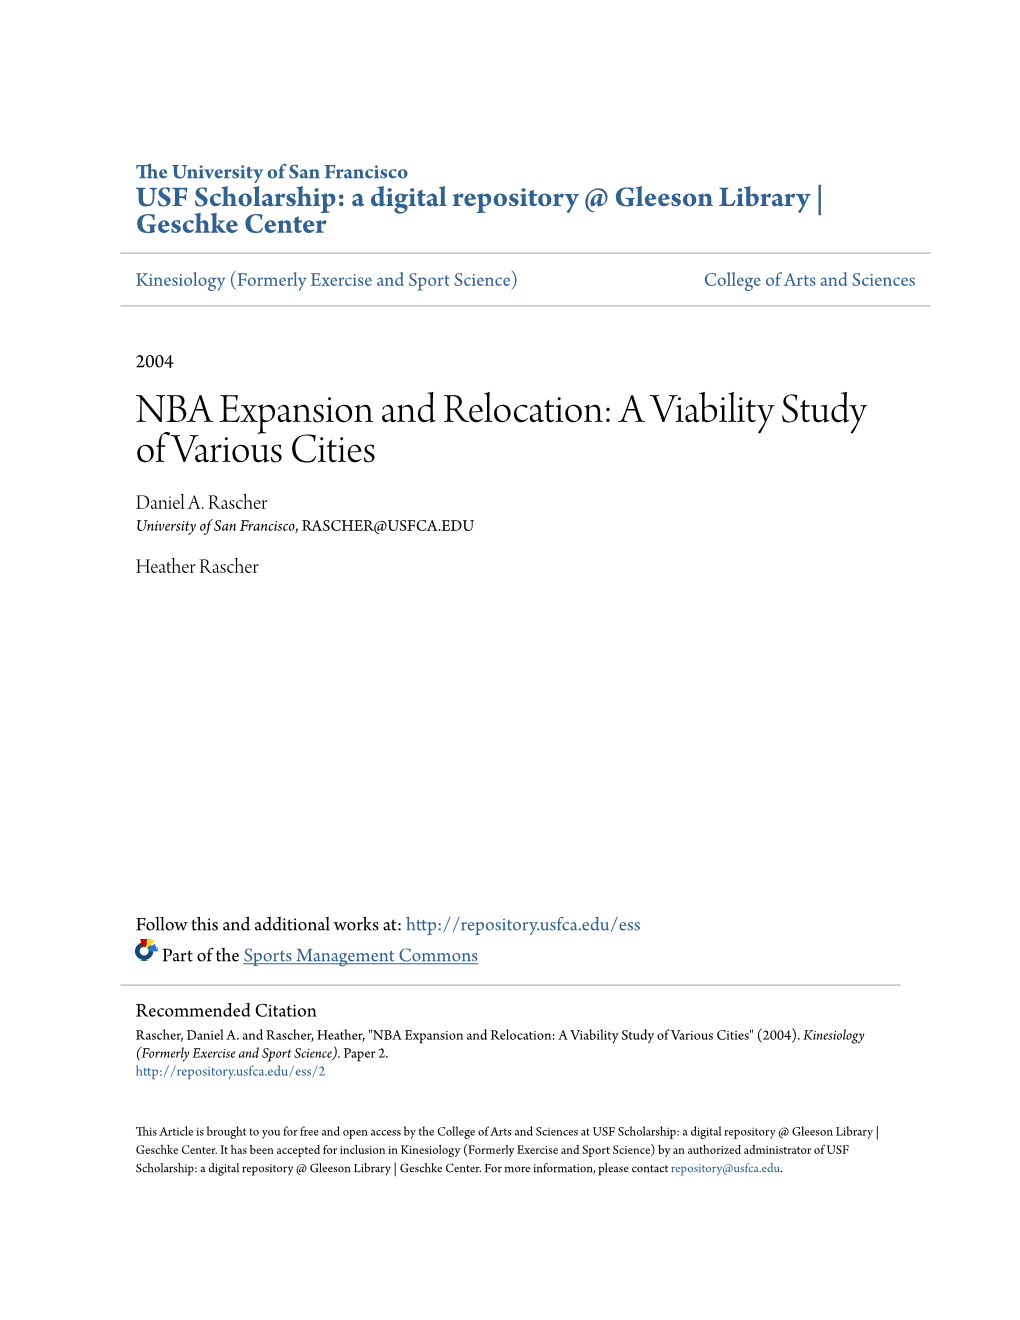 NBA Expansion and Relocation: a Viability Study of Various Cities Daniel A